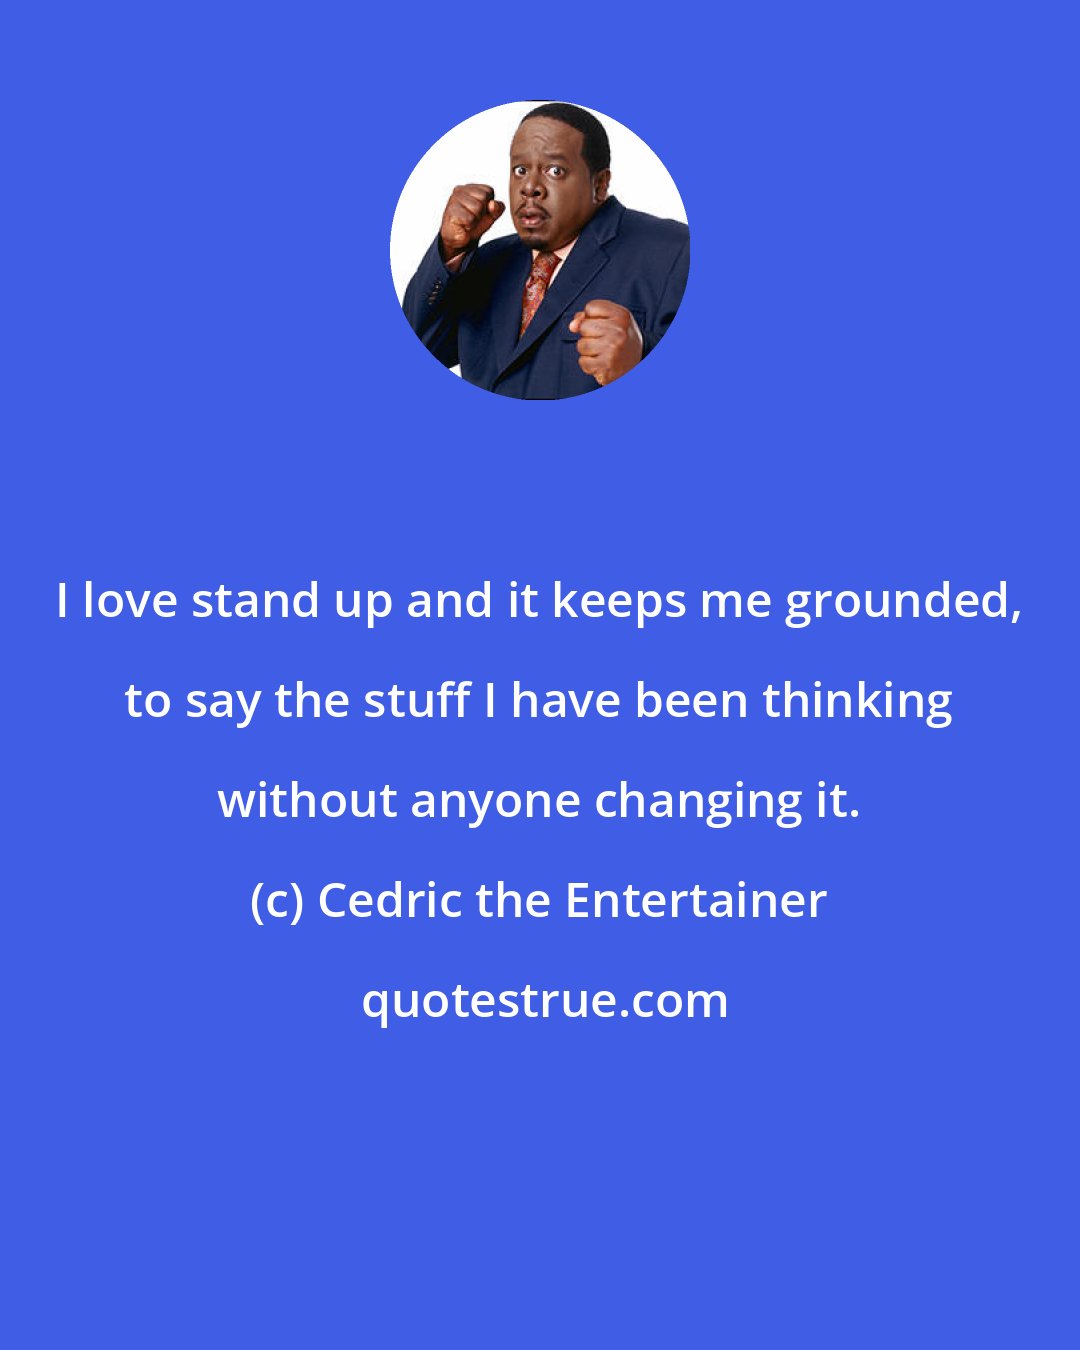 Cedric the Entertainer: I love stand up and it keeps me grounded, to say the stuff I have been thinking without anyone changing it.